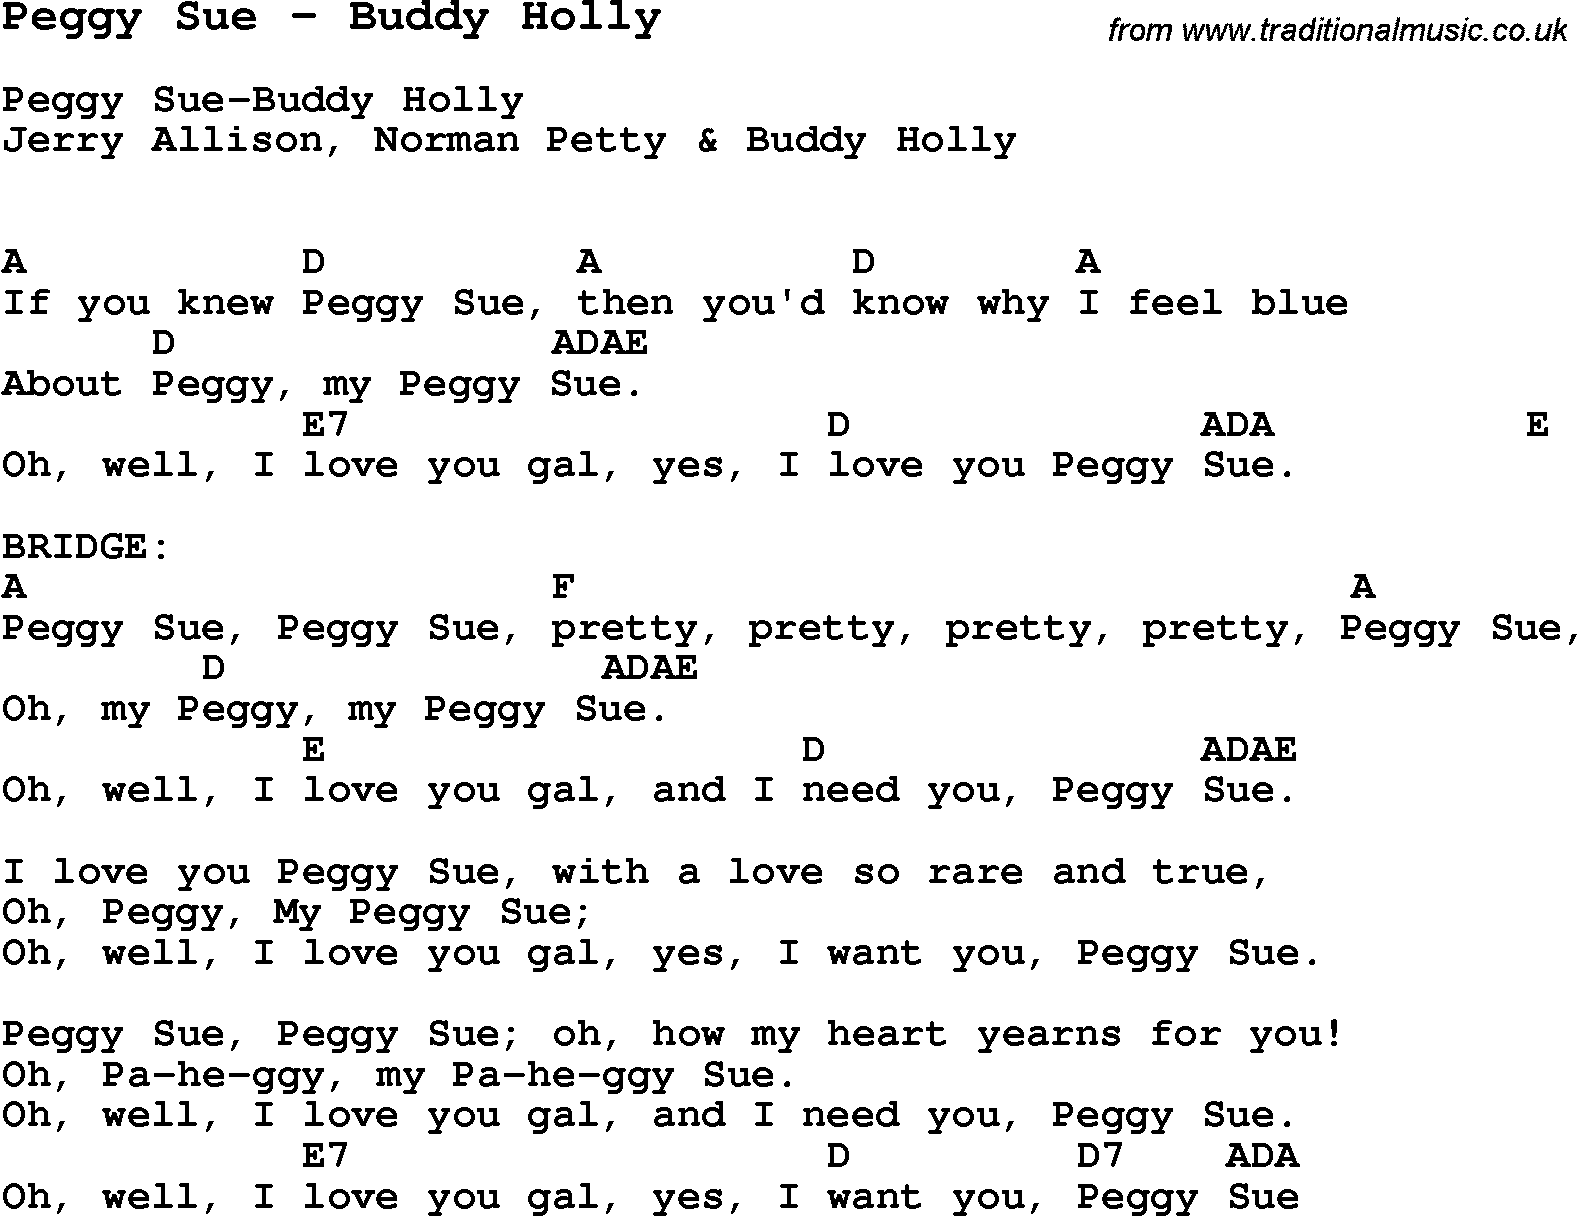 Song Peggy Sue by Buddy Holly, with lyrics for vocal performance and accompaniment chords for Ukulele, Guitar Banjo etc.